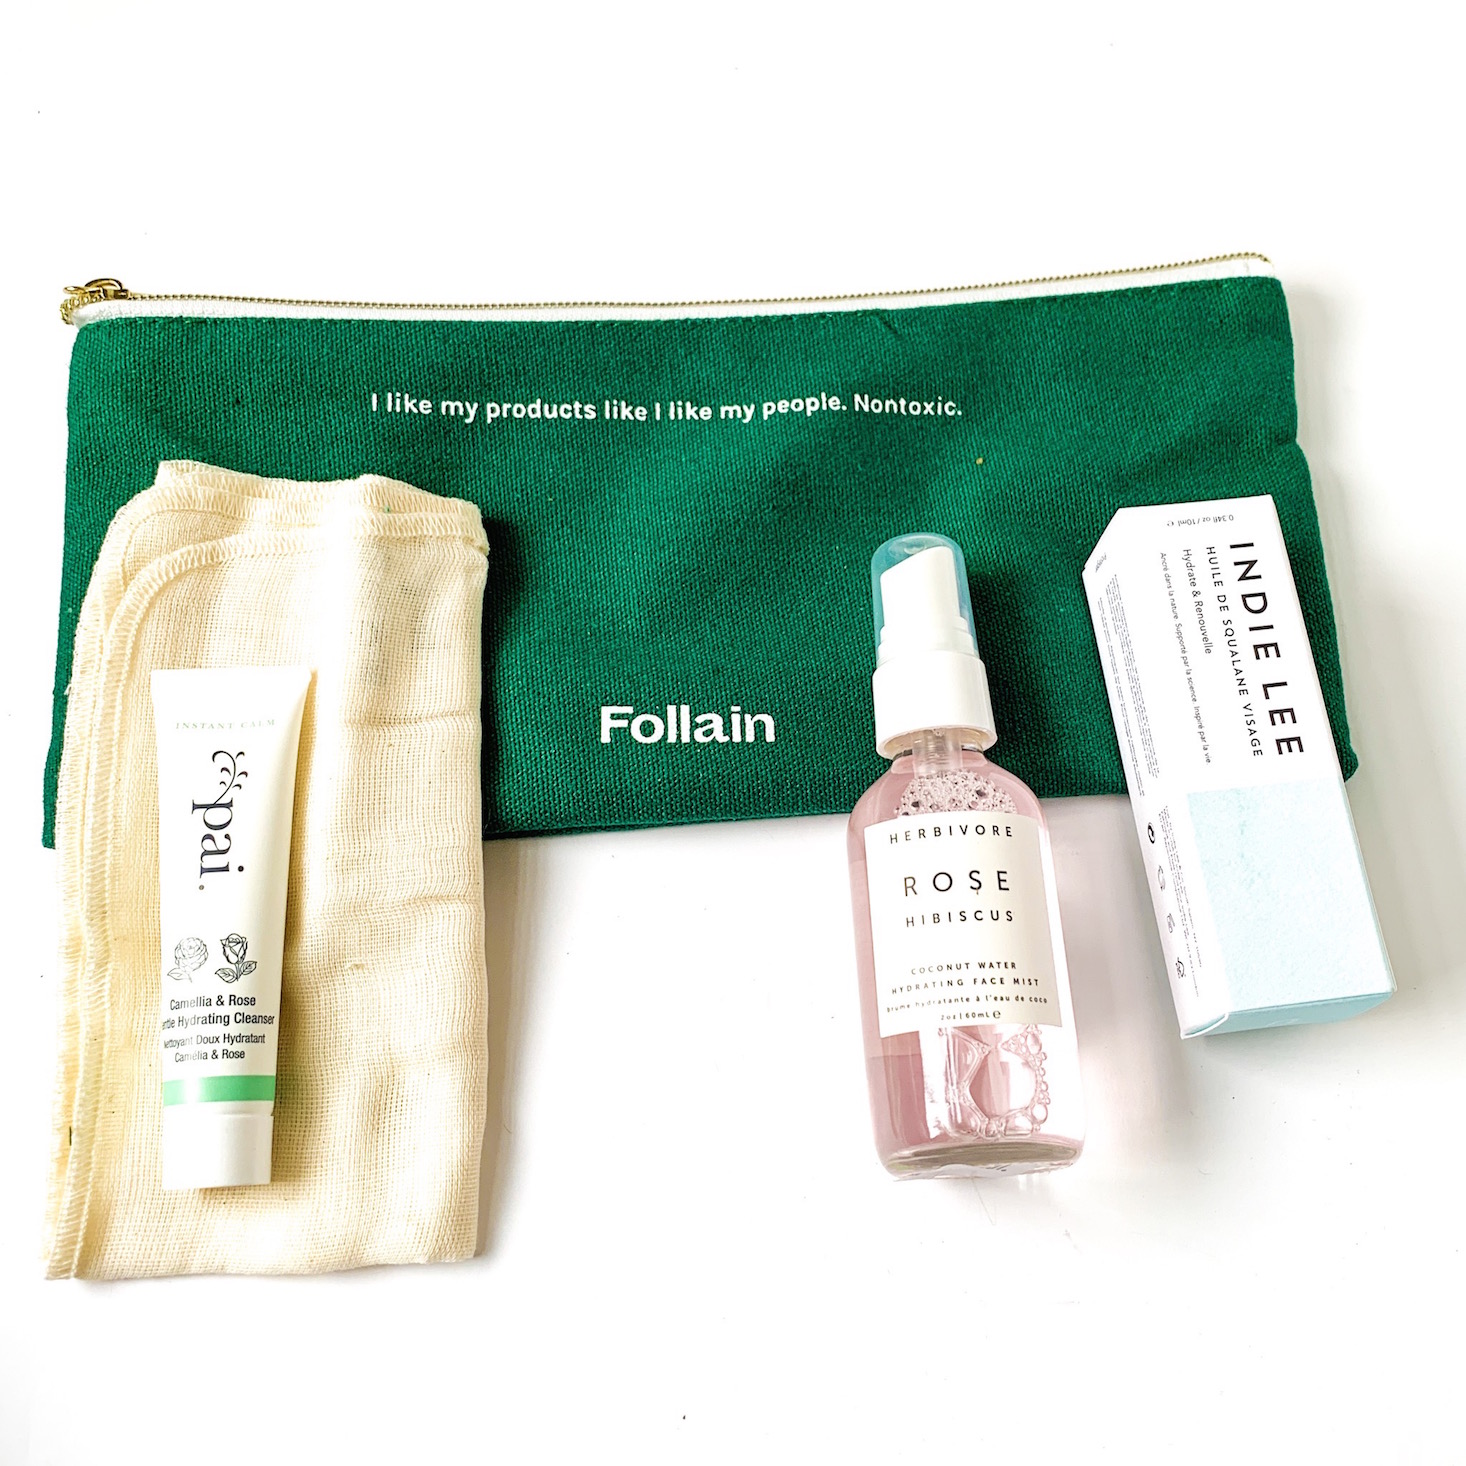 Follain Healthy Hydration Kit Review